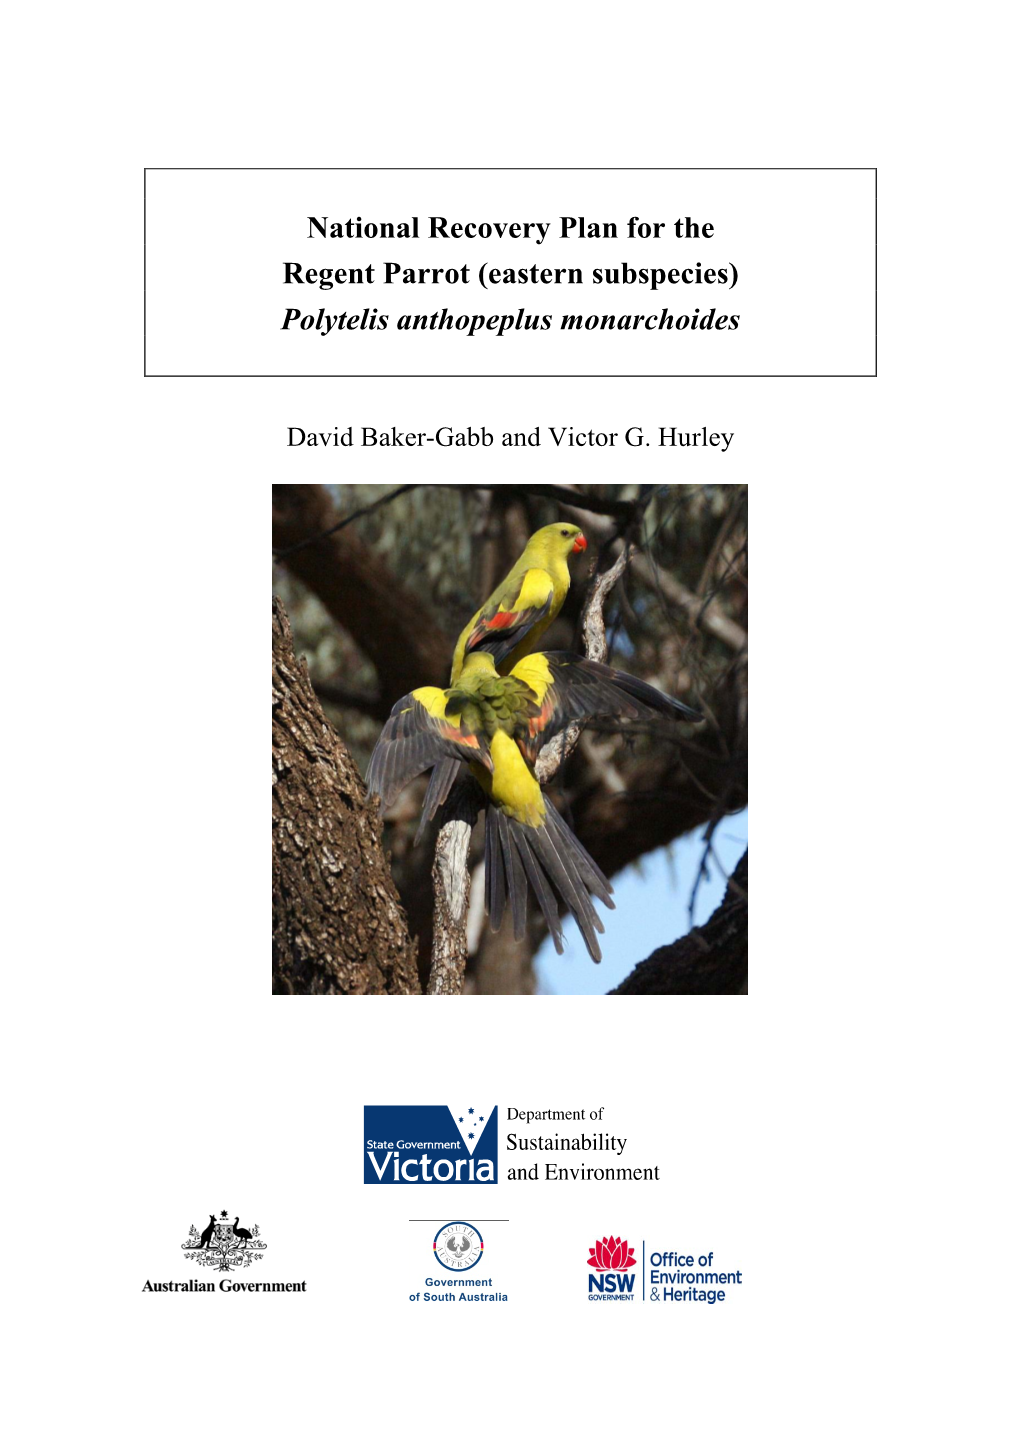 National Recovery Plan for the Regent Parrot (Eastern Subspecies) Polytelis Anthopeplus Monarchoides